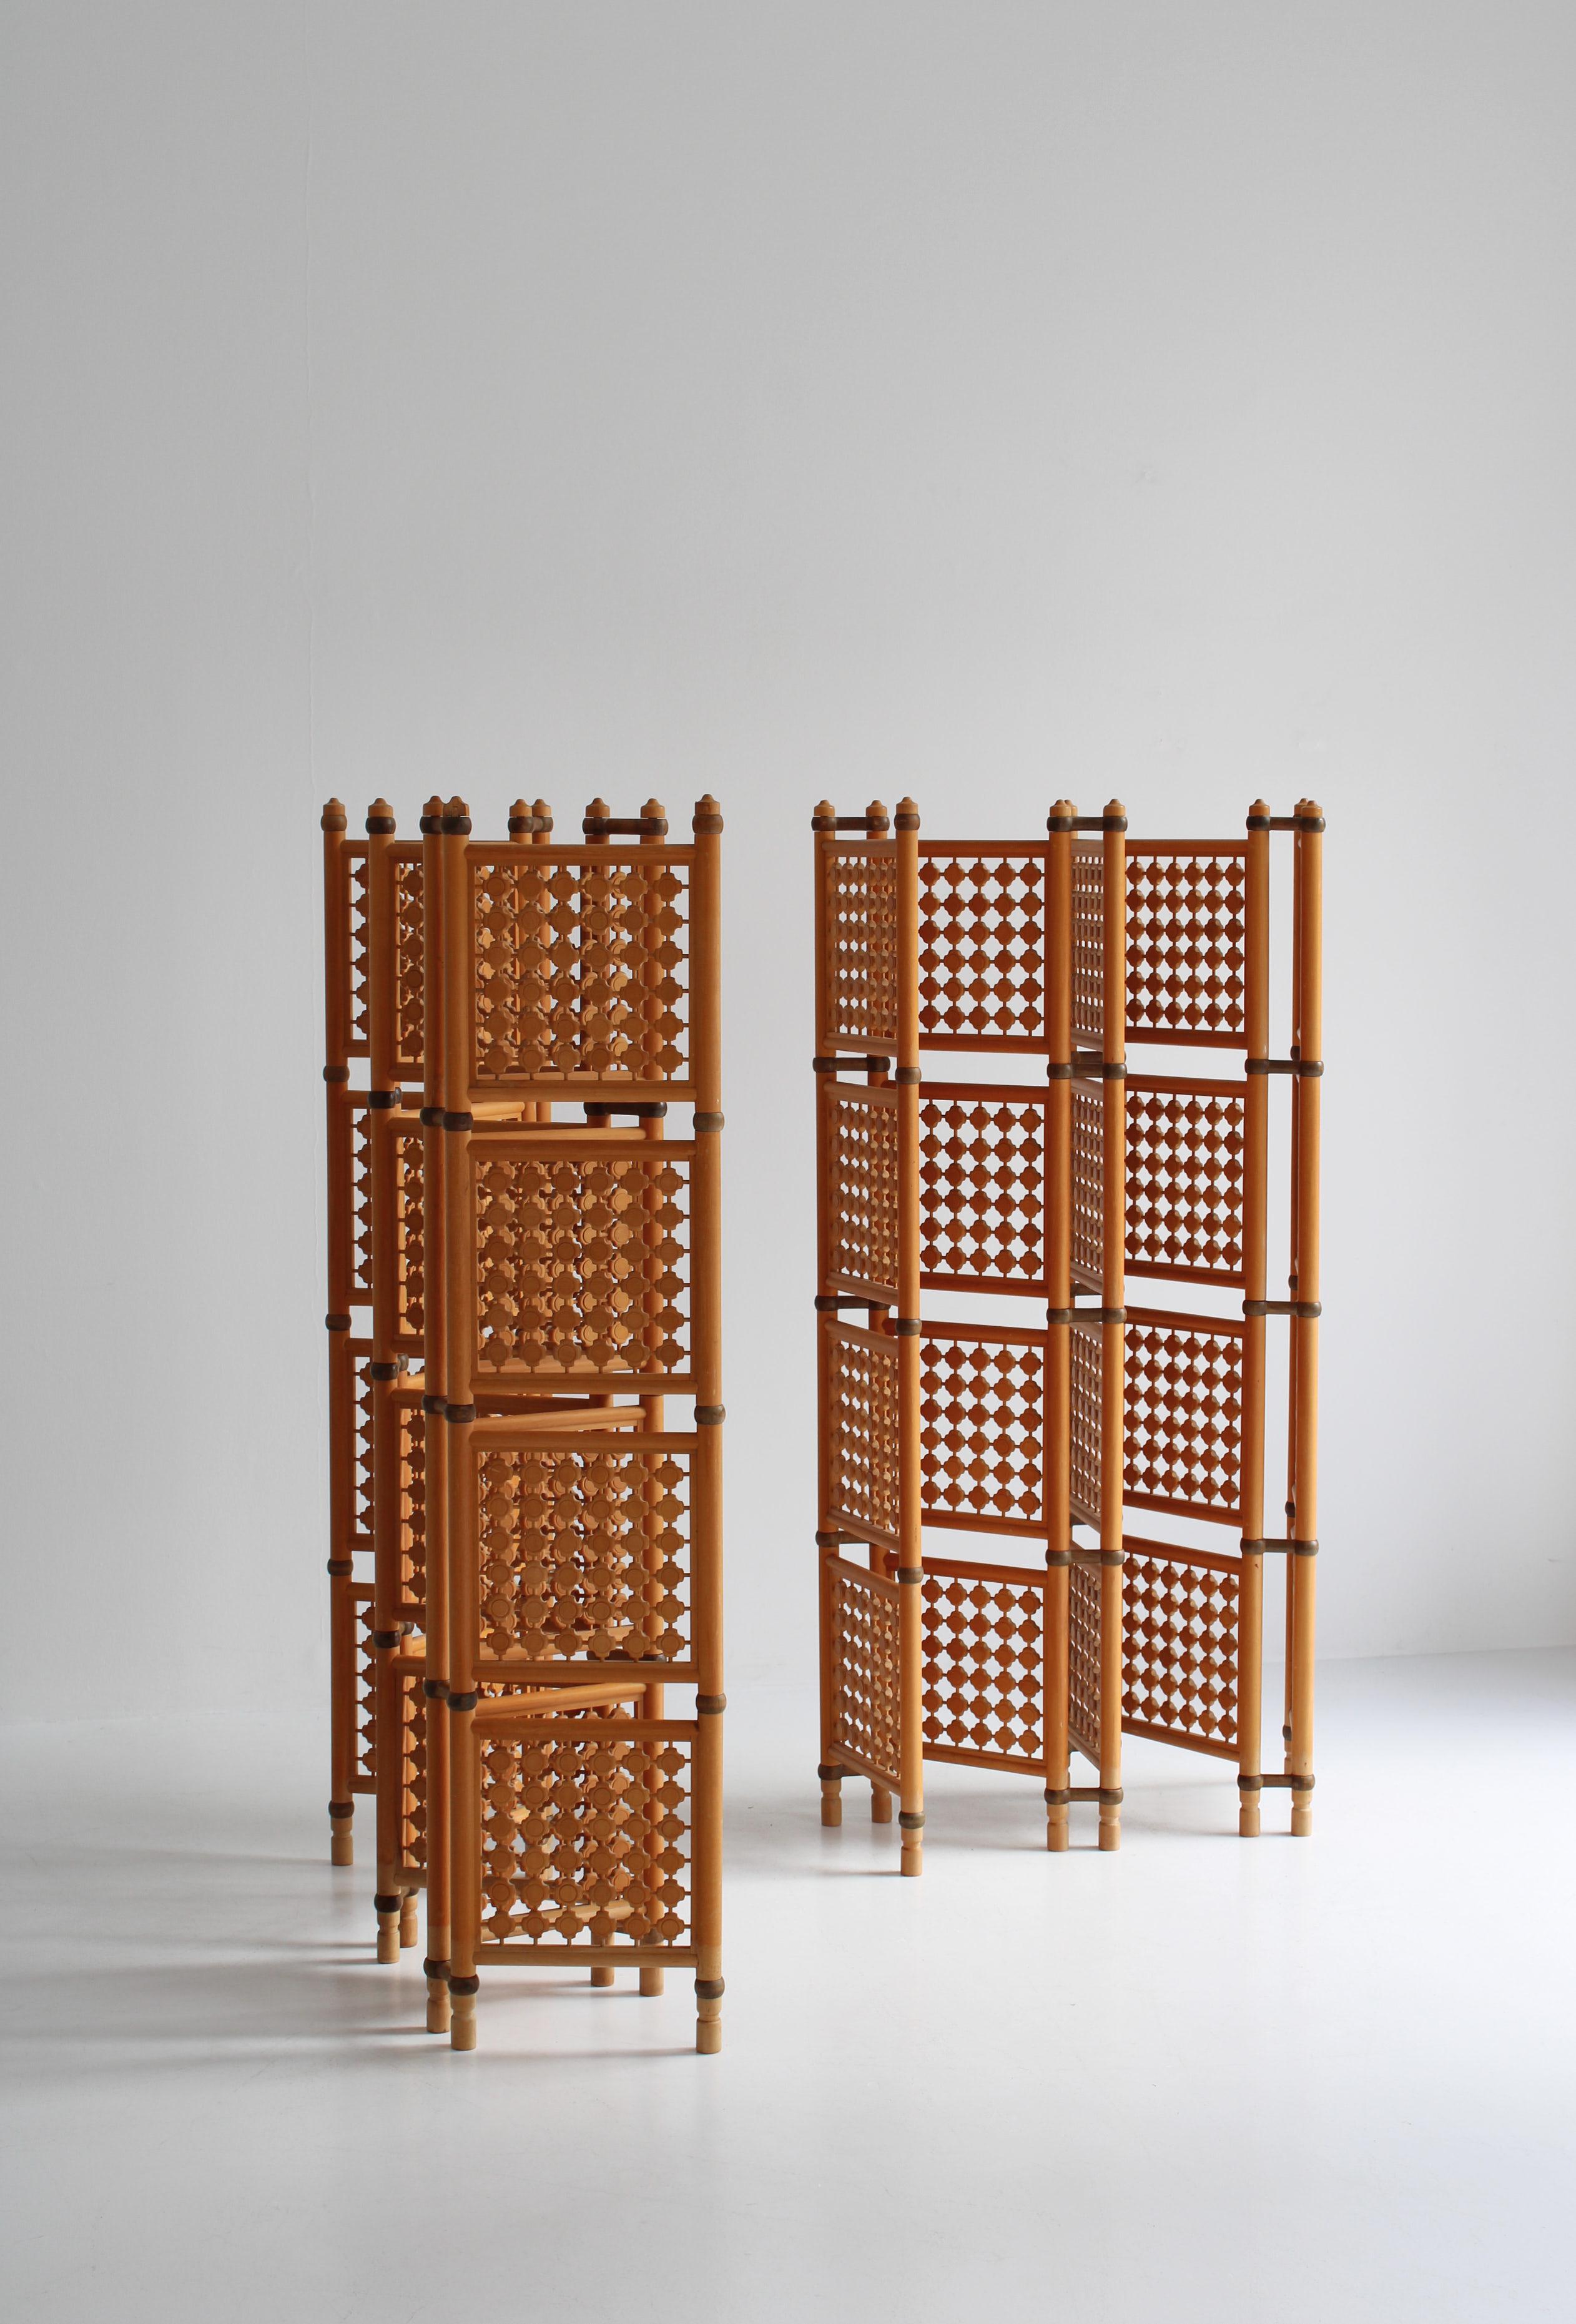 Set of Scandinavian Modern Screens or Room Dividers in Stained Beechwood, 1940s For Sale 4